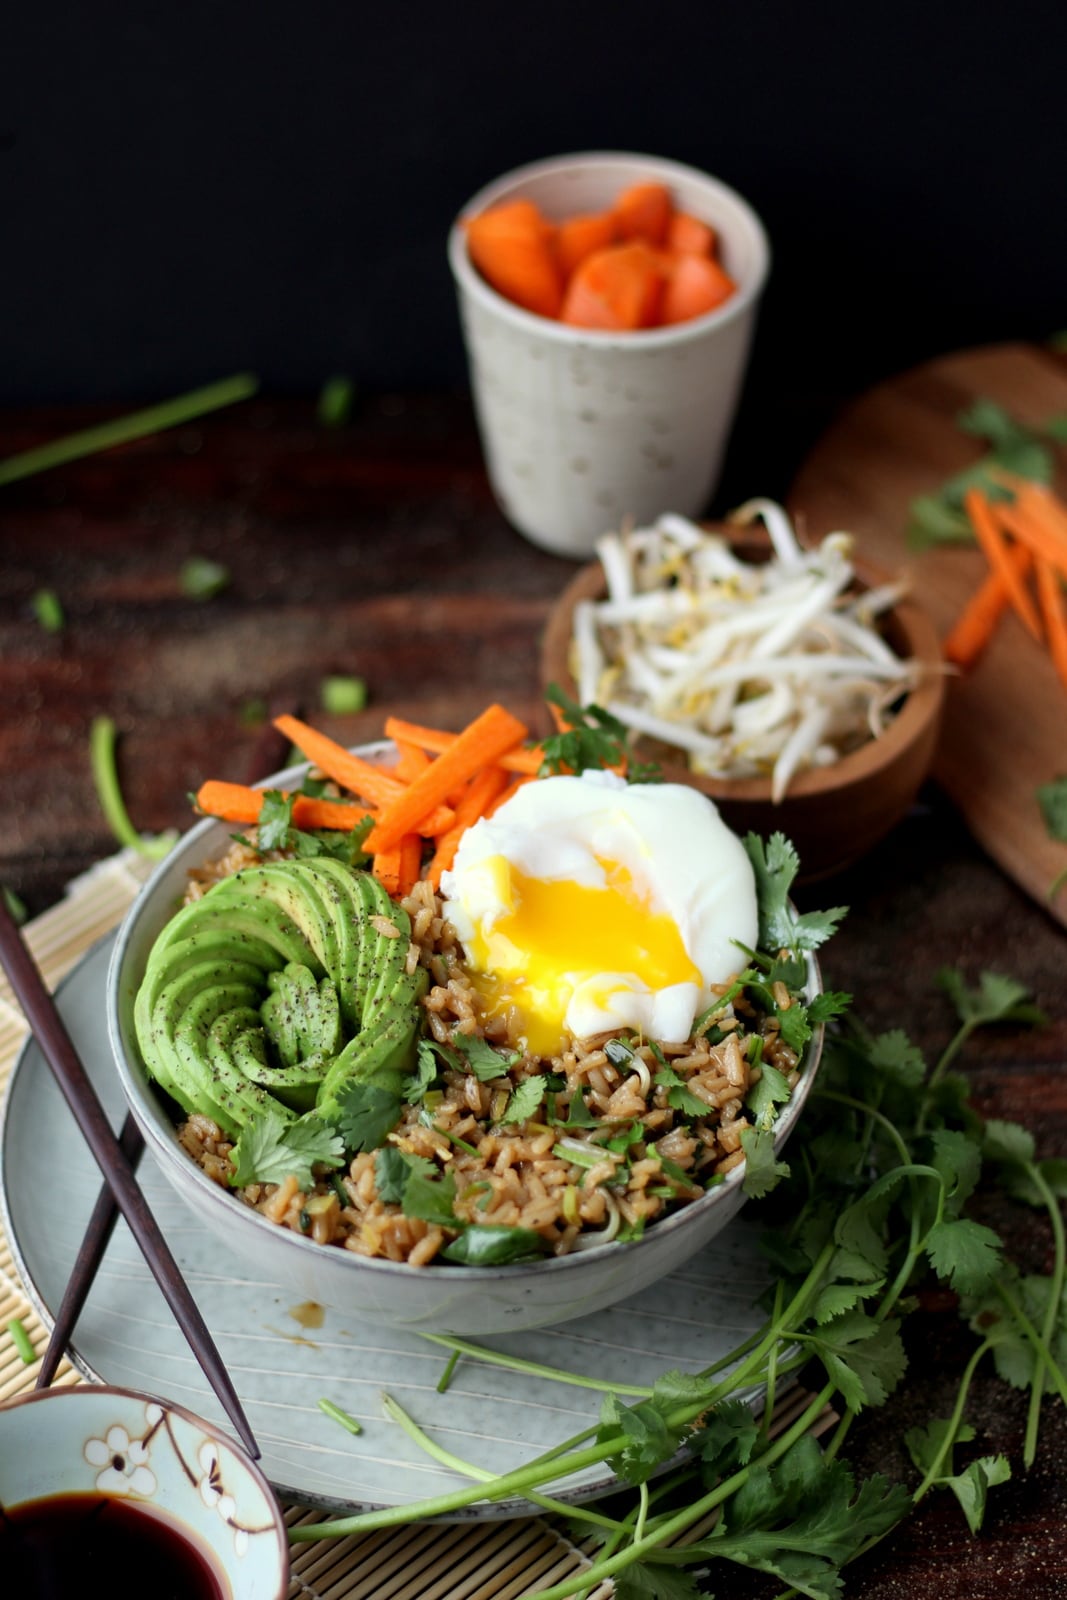 Cilantro fried rice with avocado and poached egg.